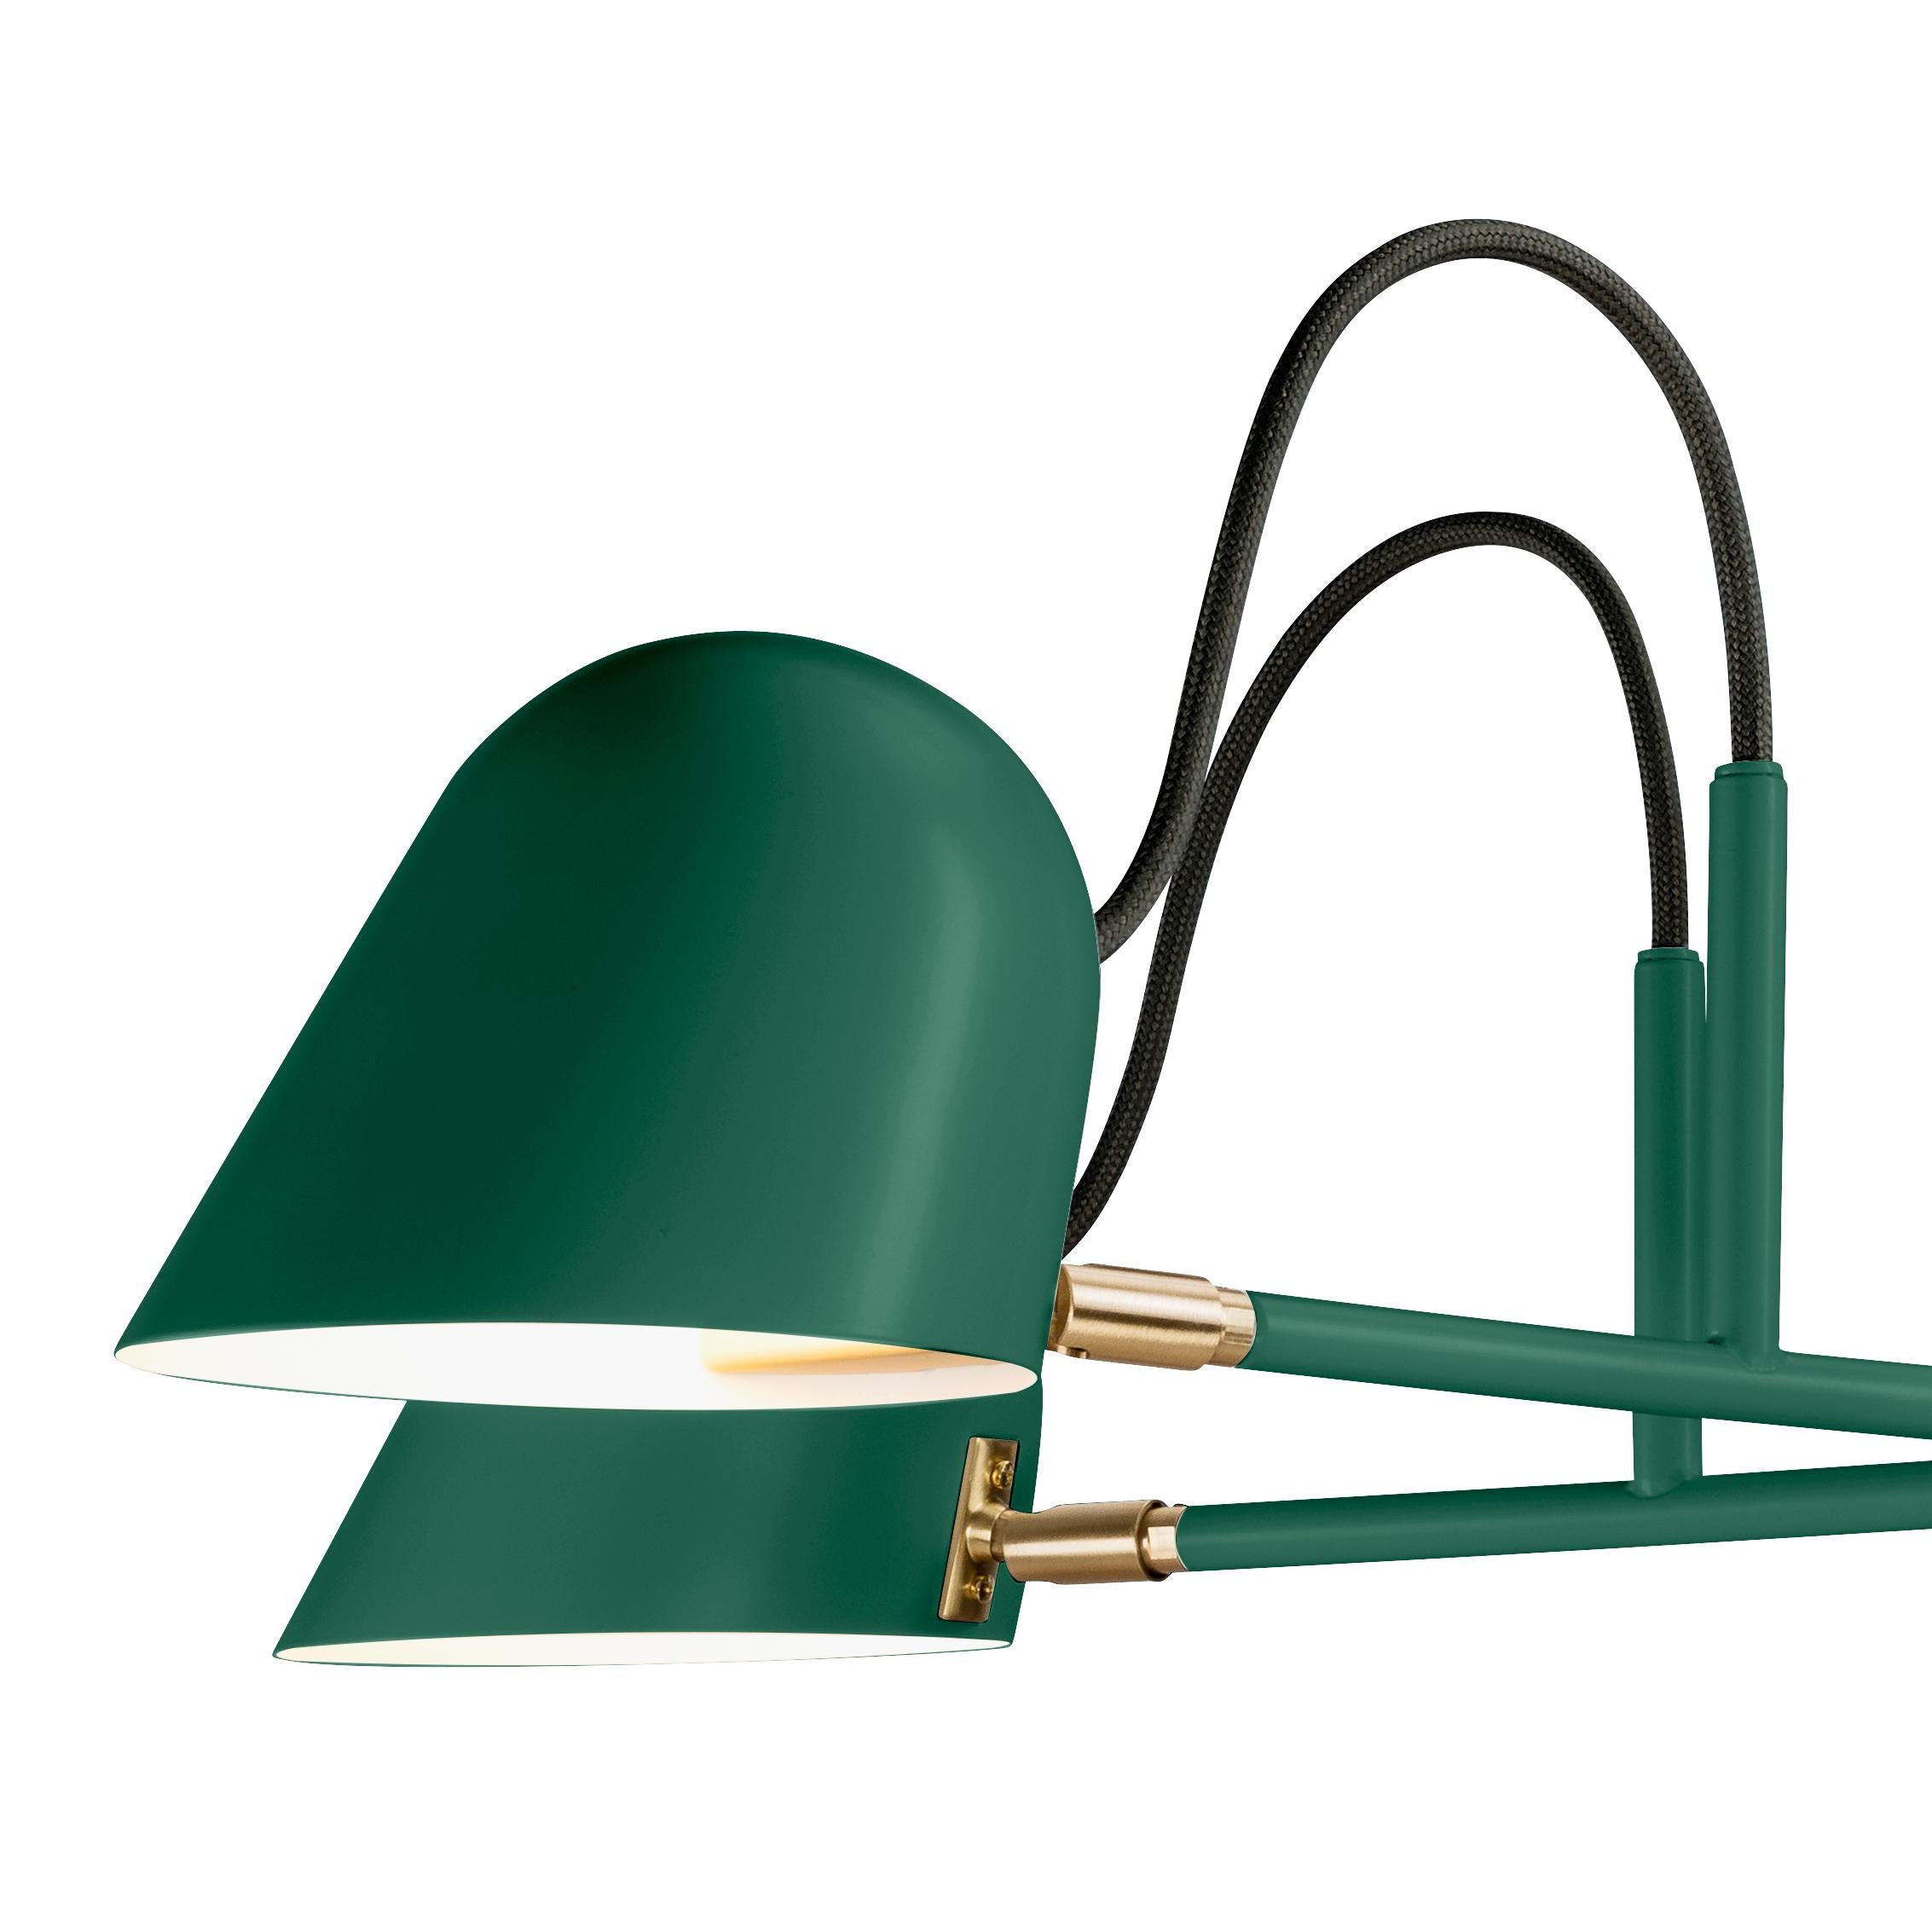 'Streck' chandelier by Joel Karlsson for Örsjö in pine green.

Executed in powder-coated steel with brass details, the 'Streck' series is both timeless and refined in its minimalism. Clean geometric lines and understated simplicity make each